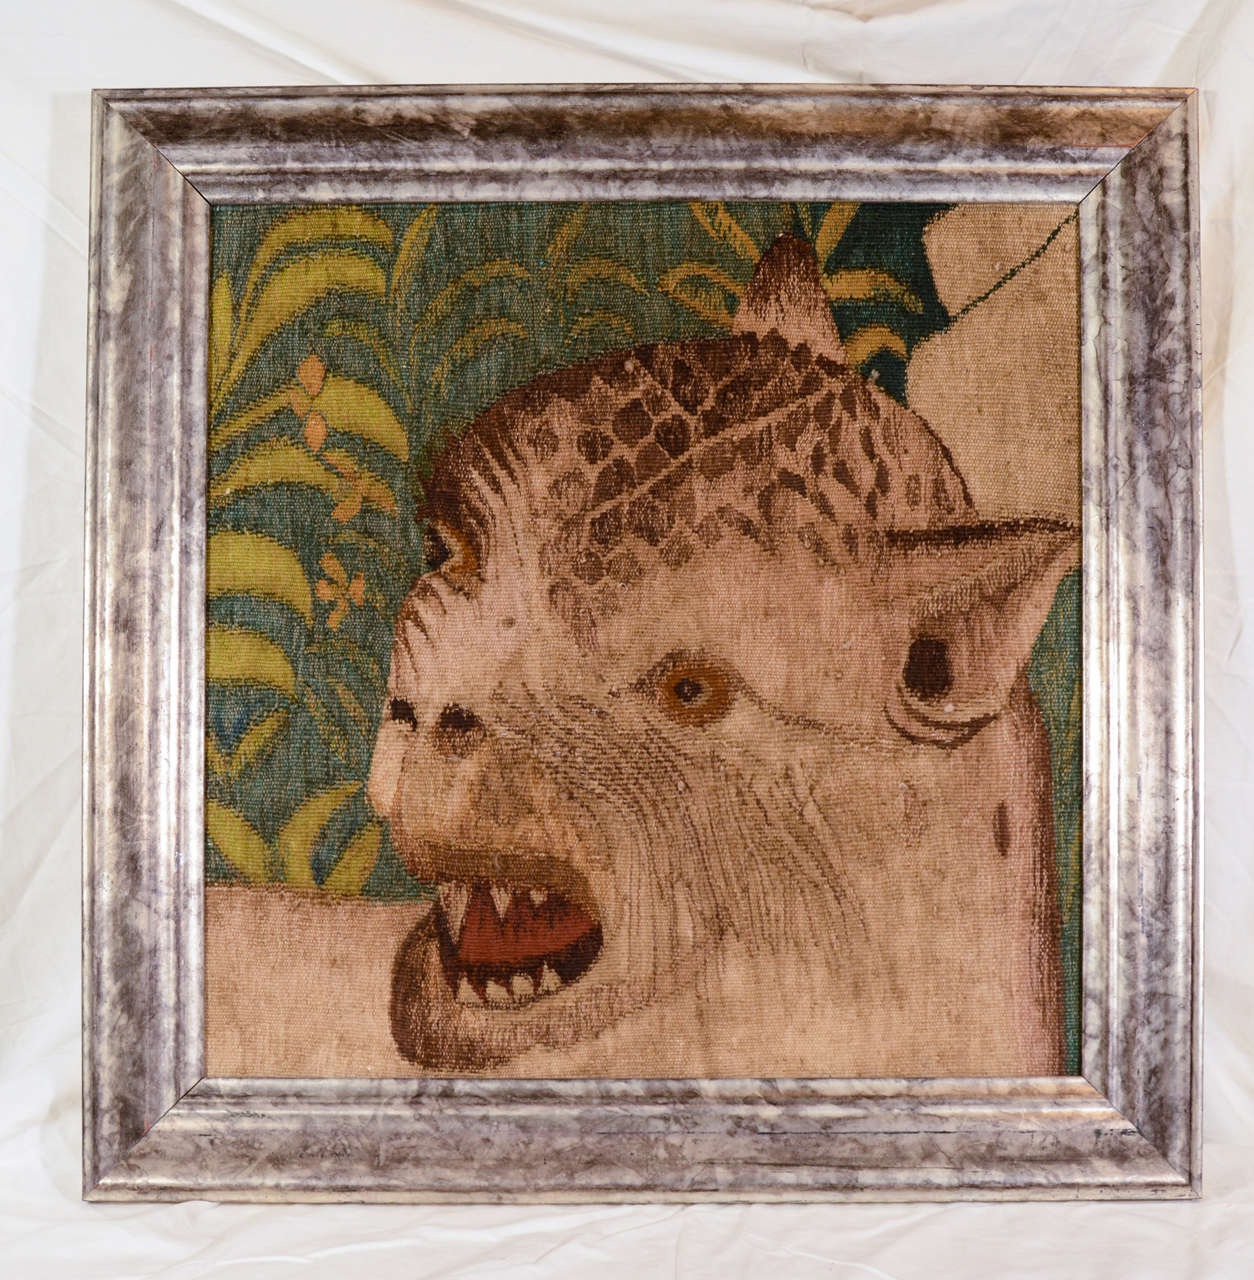 A framed wool tapestry showing a leopard, his fierce face turned towards us, his teeth bared as if some prey had caught his attention. 
This is a fragment of a larger tapestry. In the mid-18th century there were many tapestry workshops in France